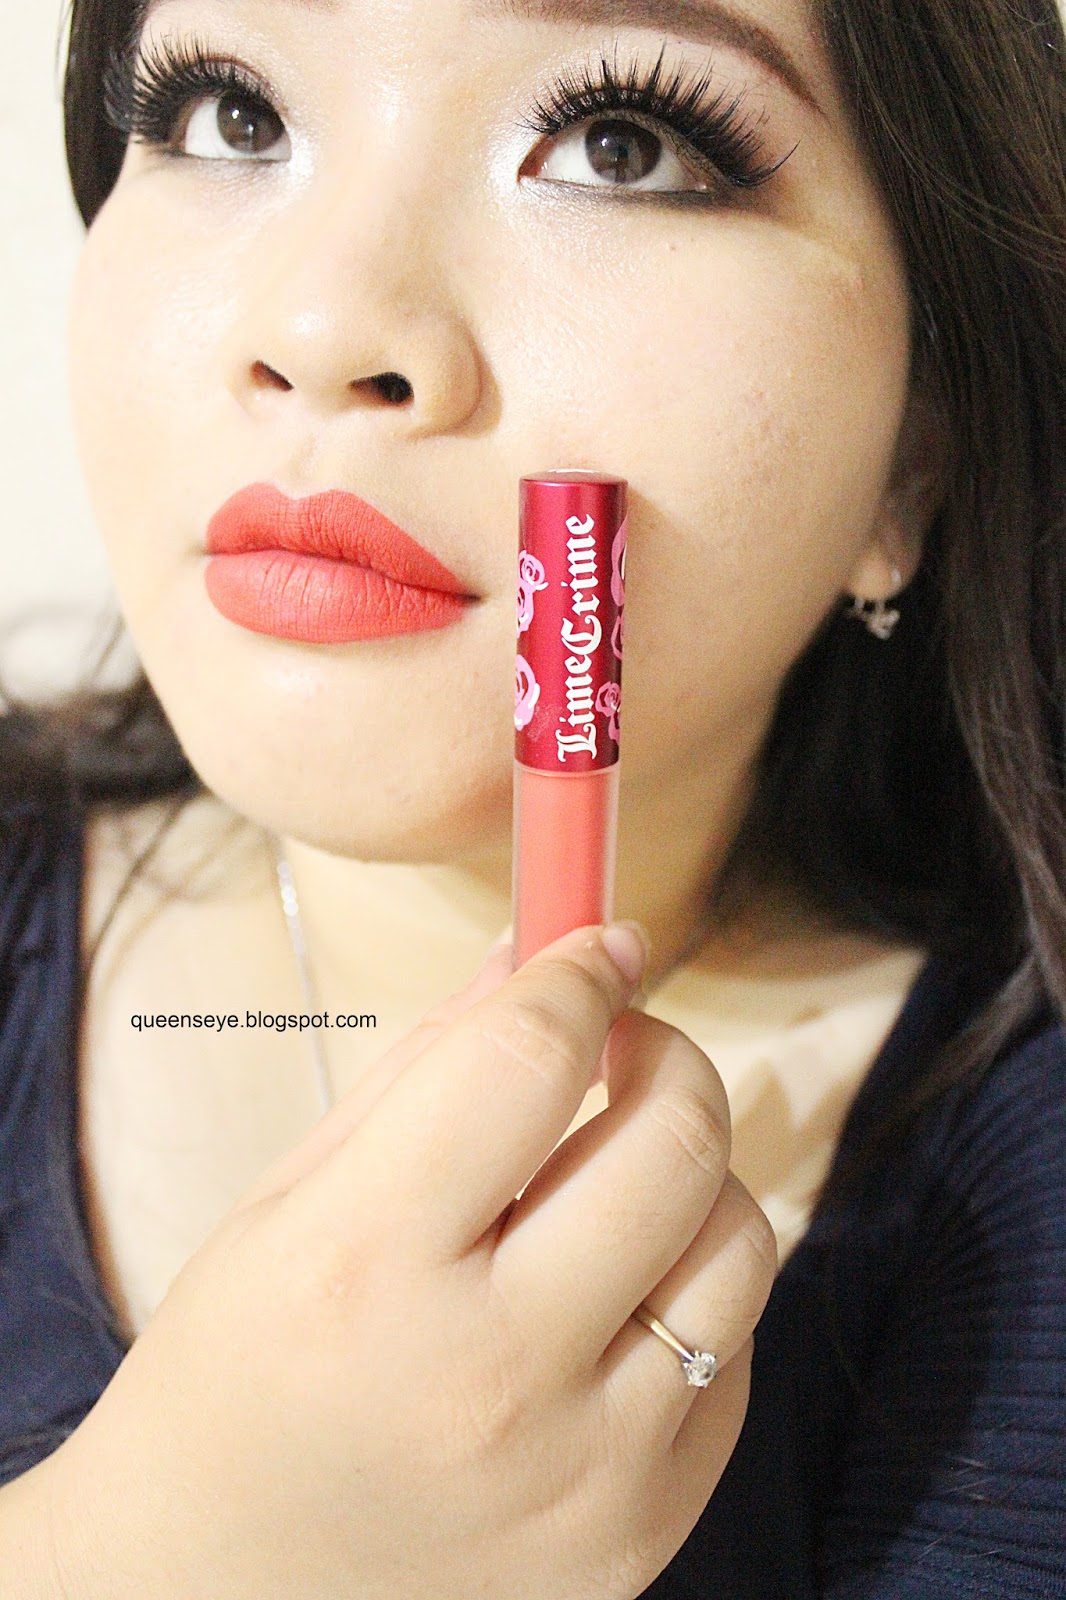 LIME CRIME Velvetines "Suedeberry" .